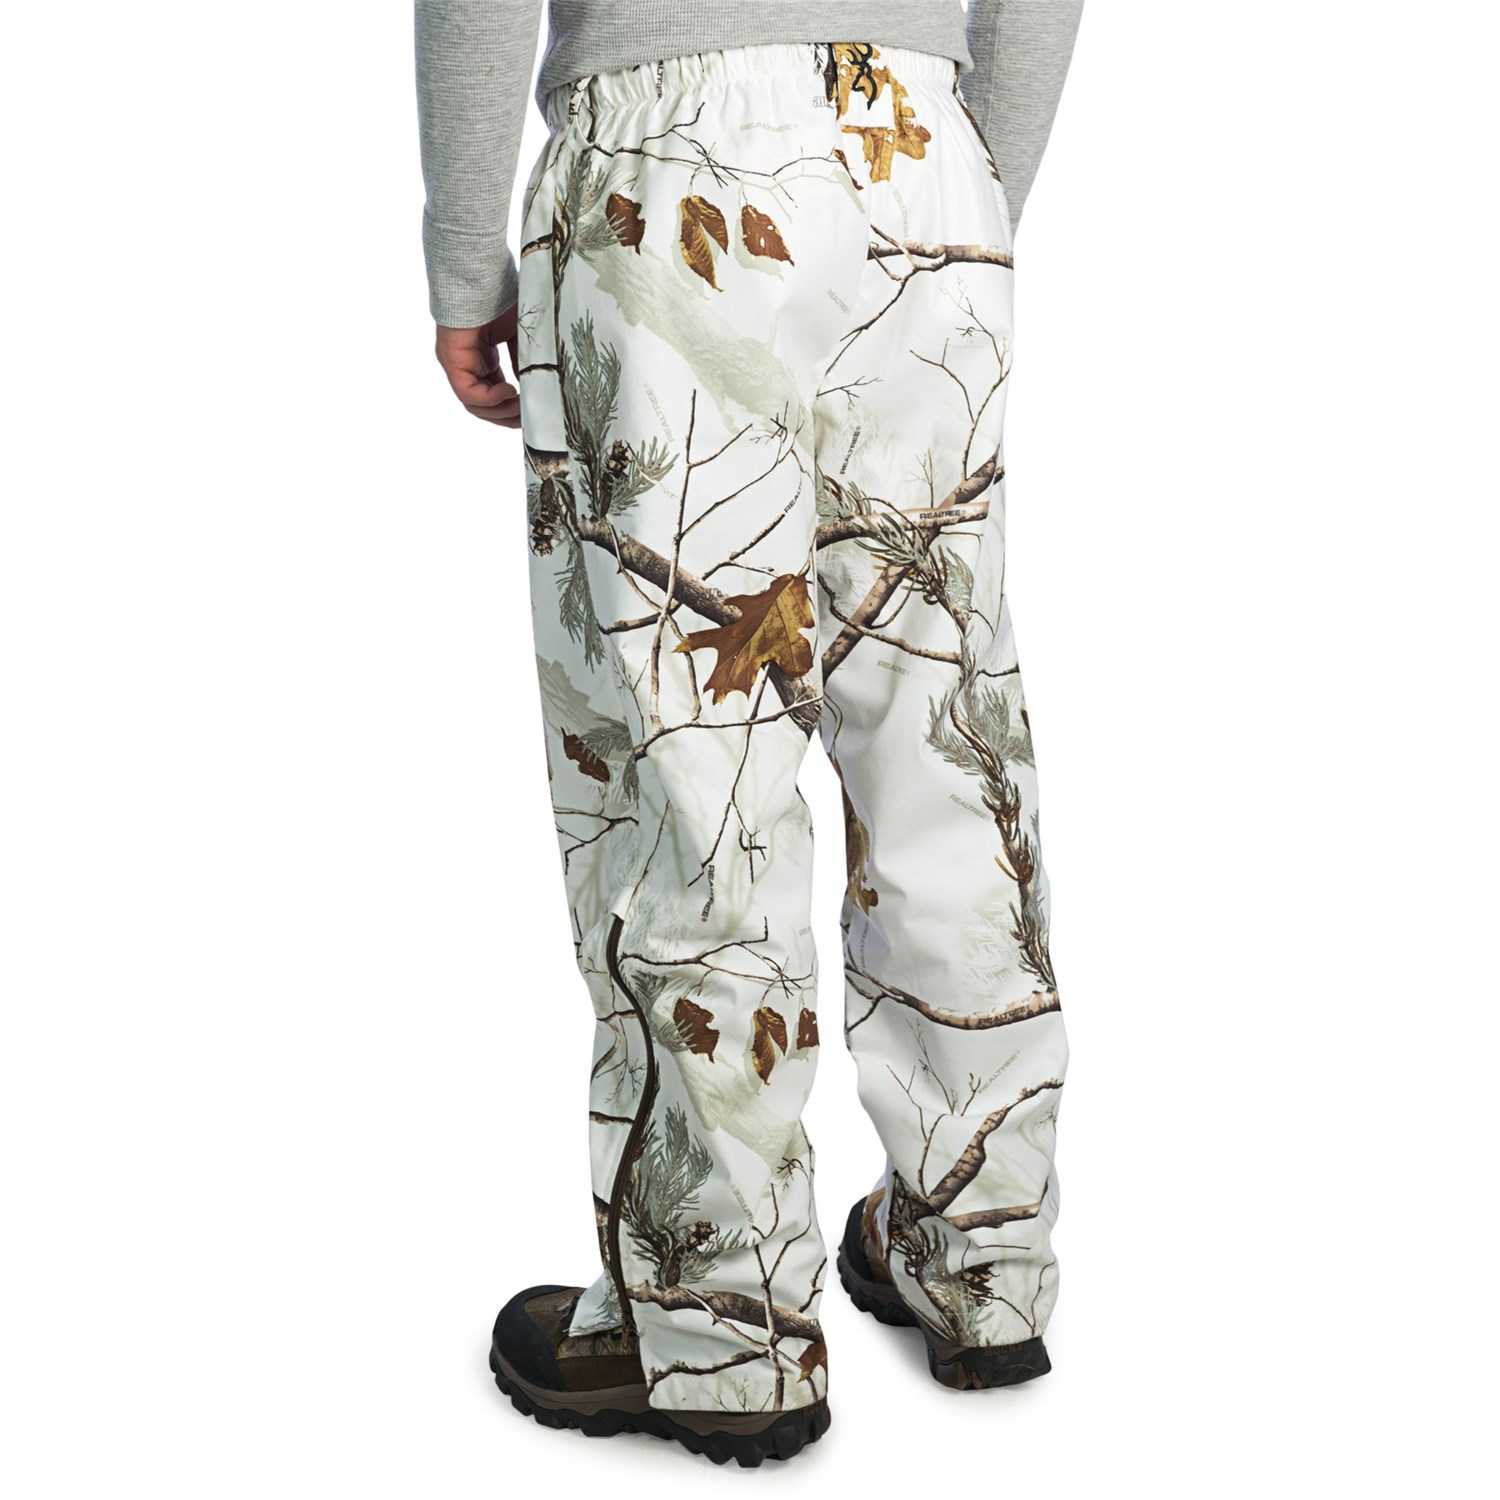 Browning Snow Camo Shell Pants (For Men) 8410A - Save 30%